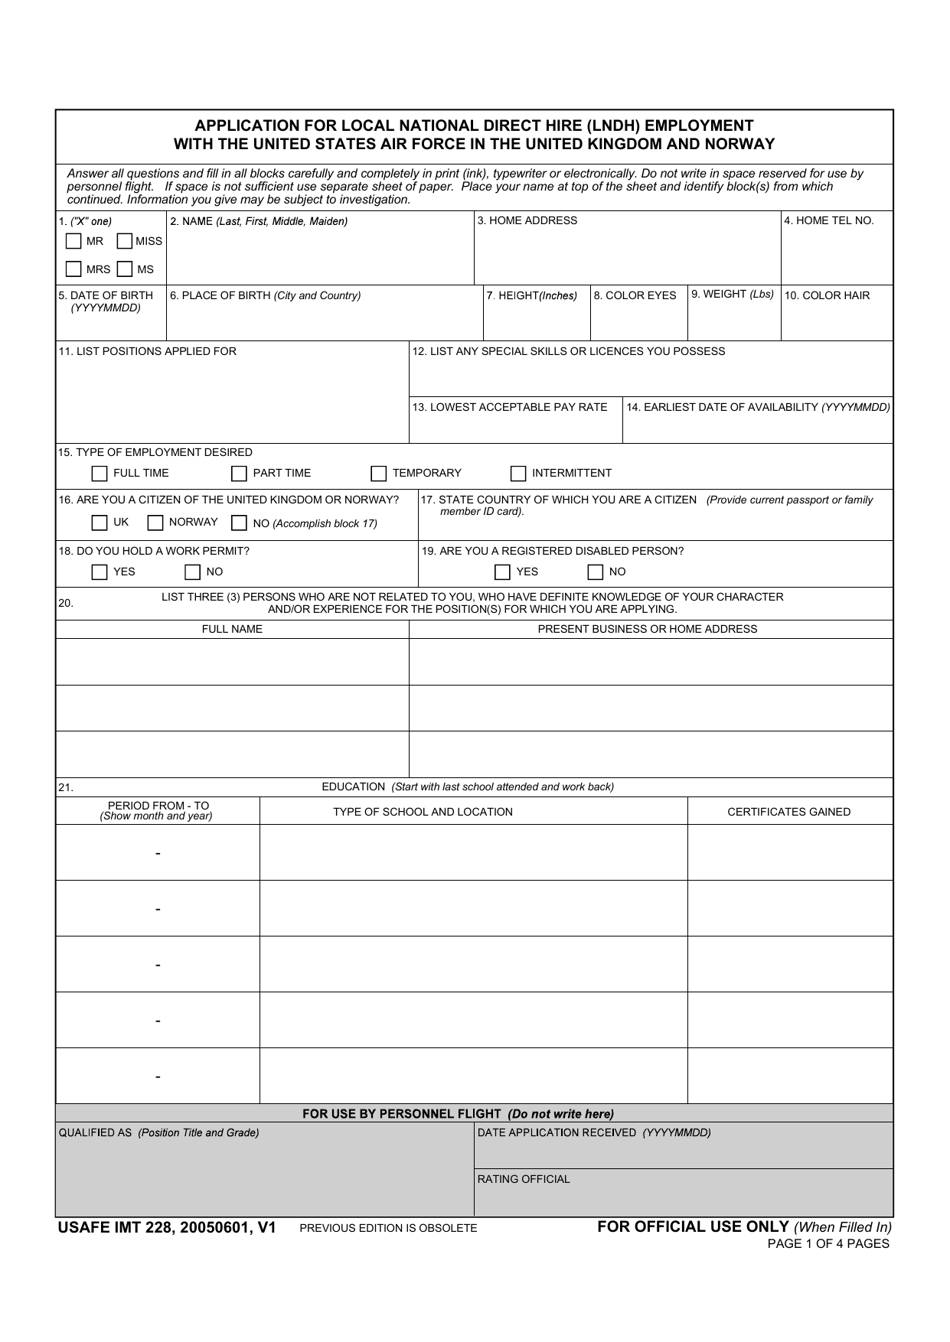 USAFE IMT Form 228 Application for Local National Direct Hire (Lndh) Employment With the United States Air Force in the United Kingdom and Norway, Page 1